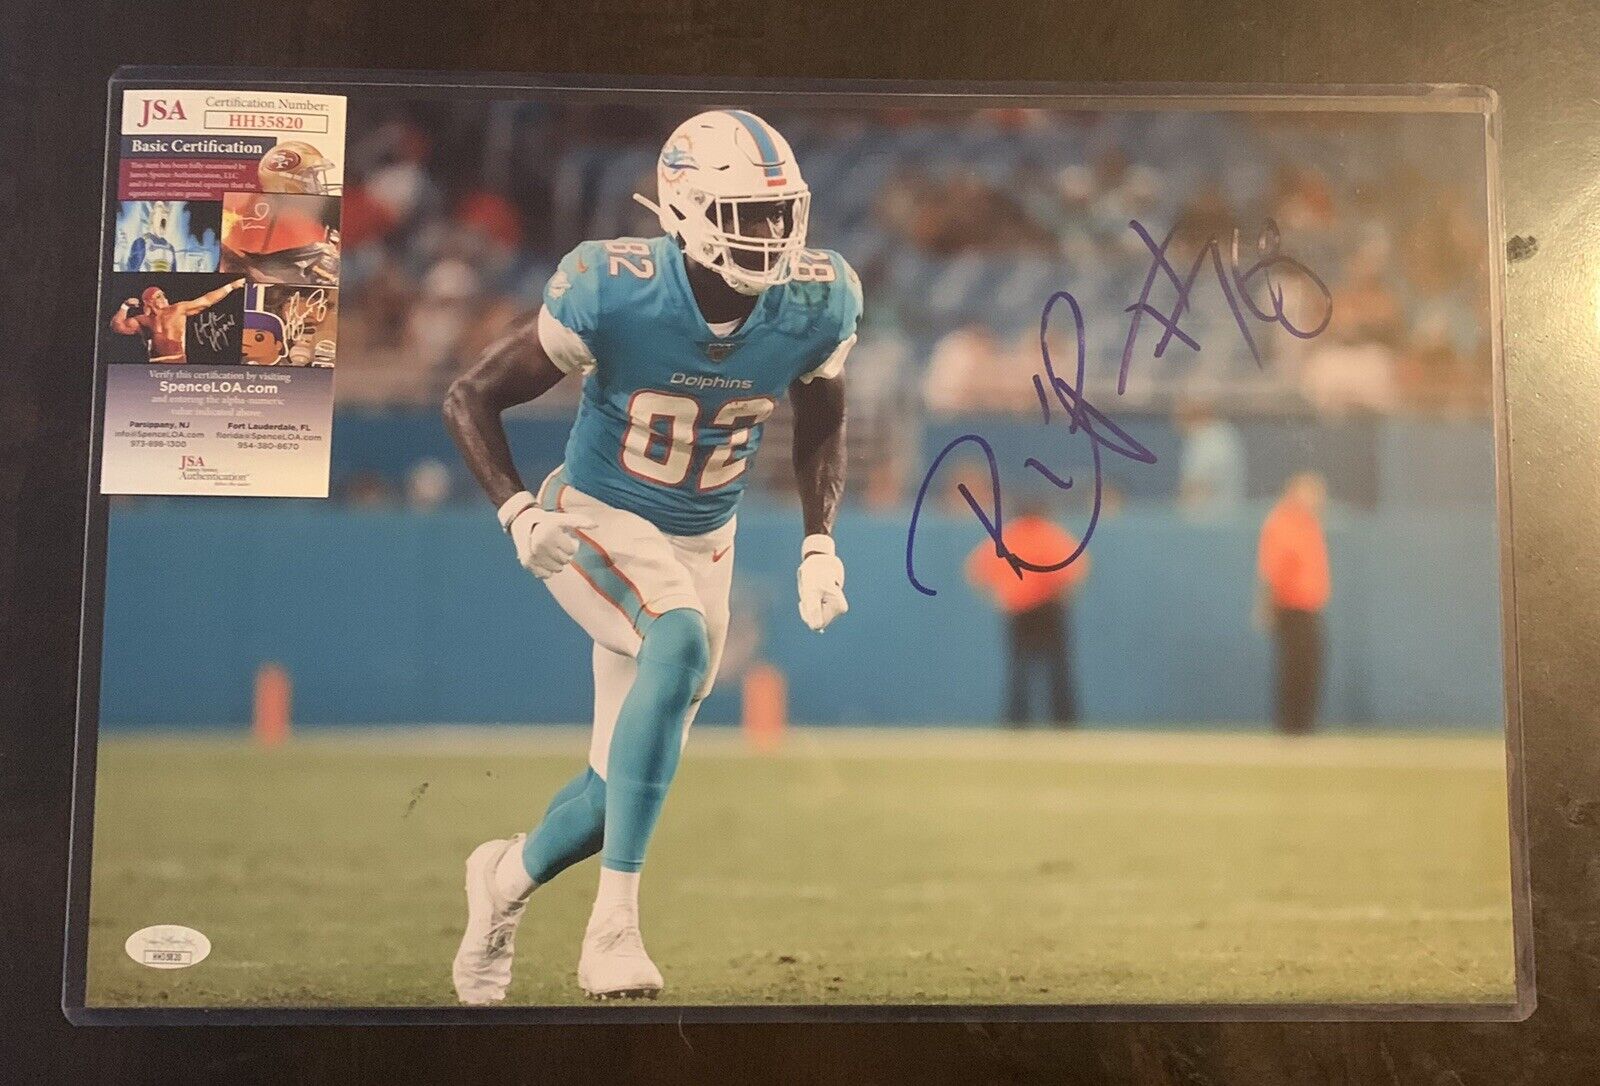 PRESTON WILLIAMS 11x17 Signed Photo Poster painting DOLPHINS FOOTBALL JSA/COA HH35820